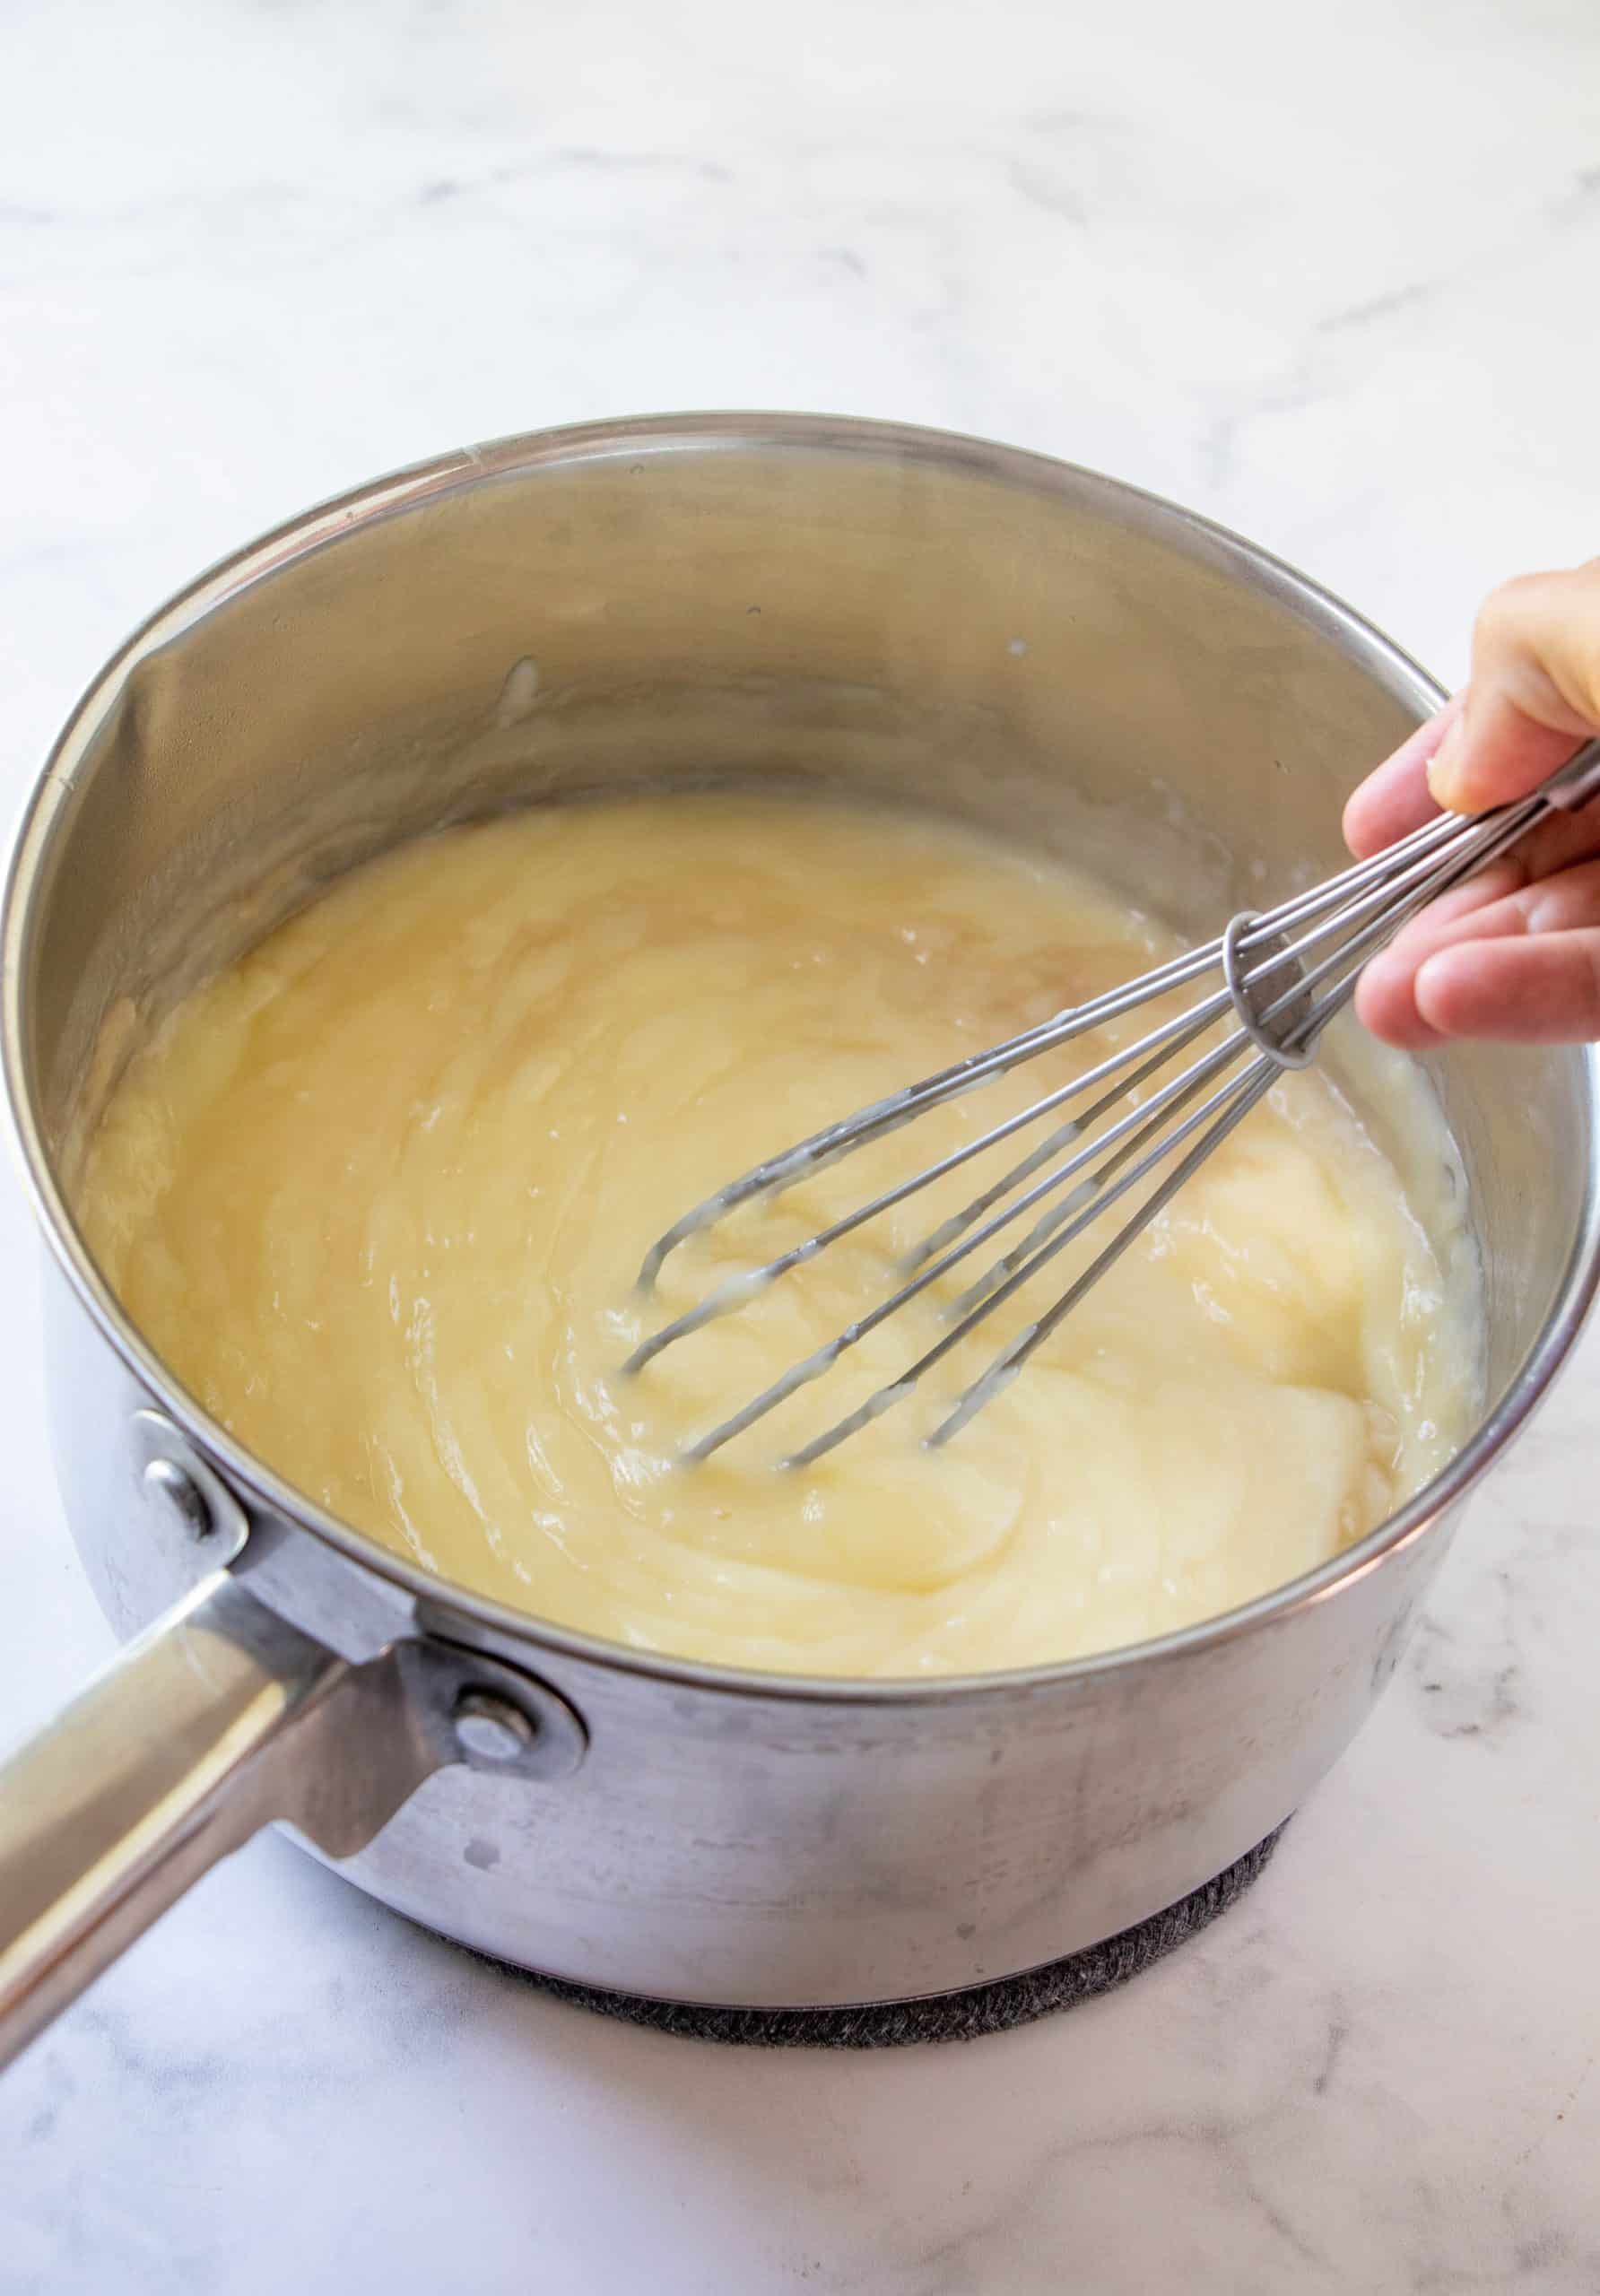 Whisk mixing vanilla and butter into pudding mixture.